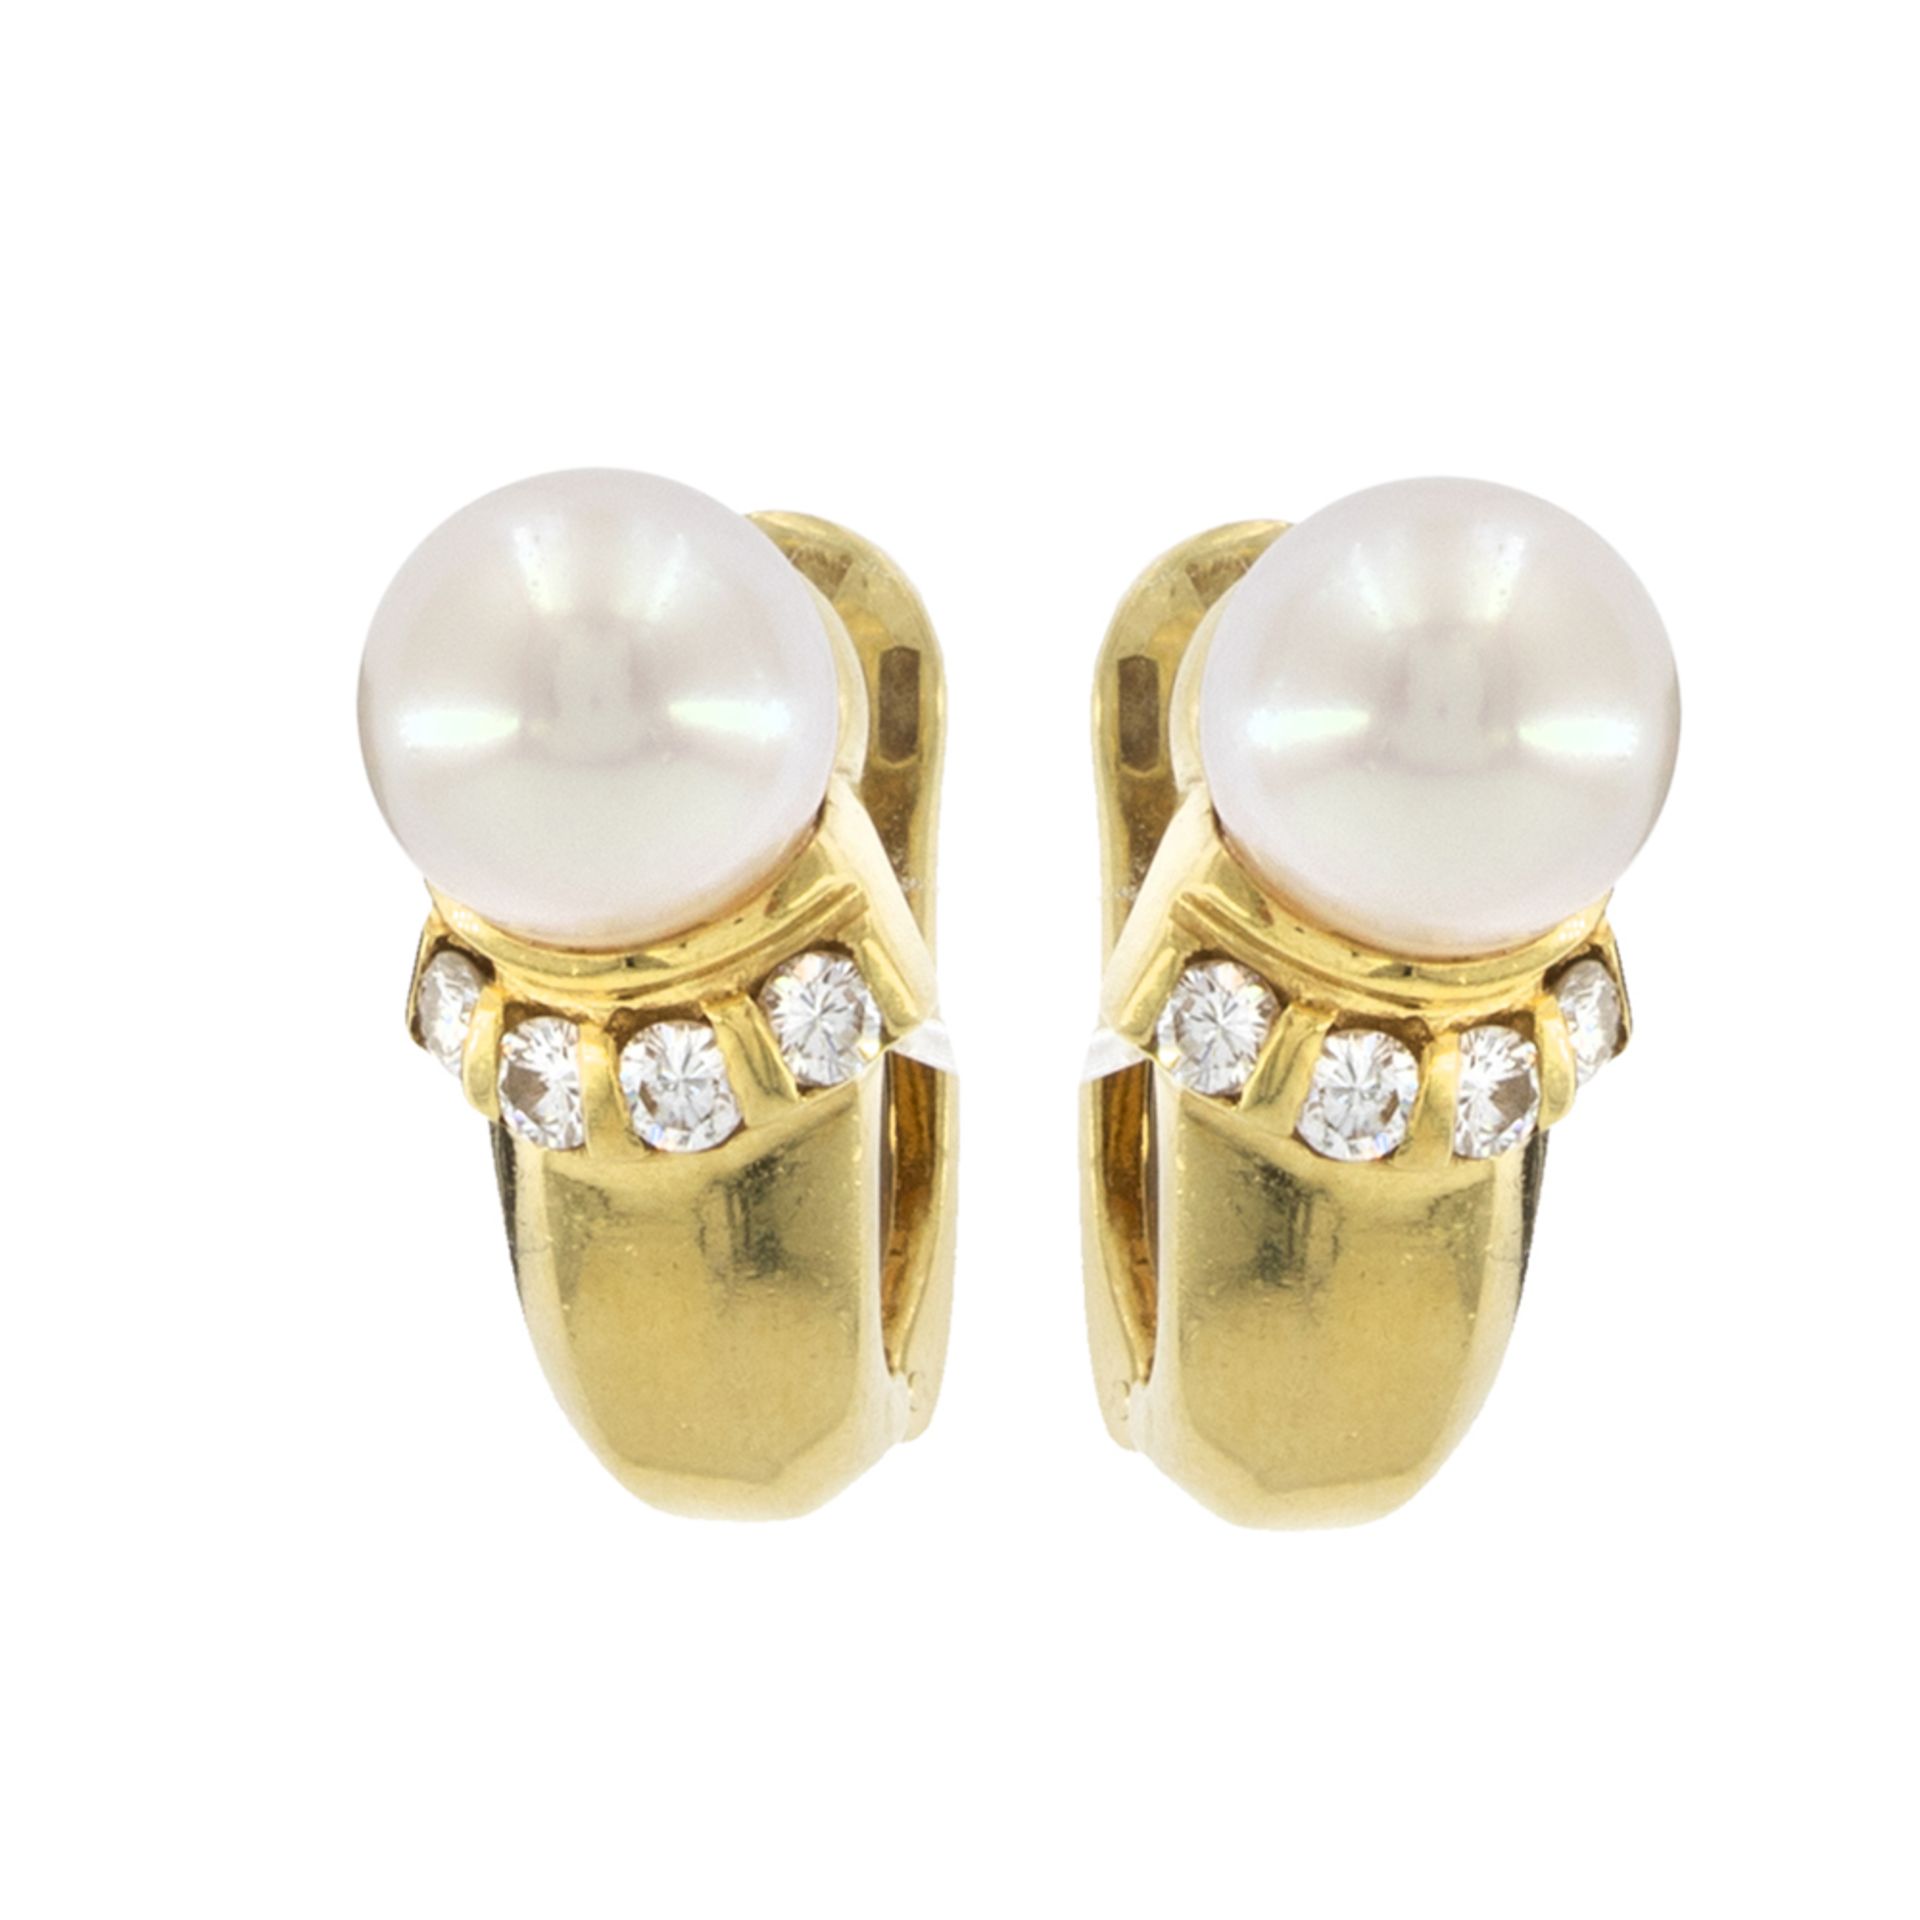 18kt yellow gold lobe earrings with cultured pearls and diamonds